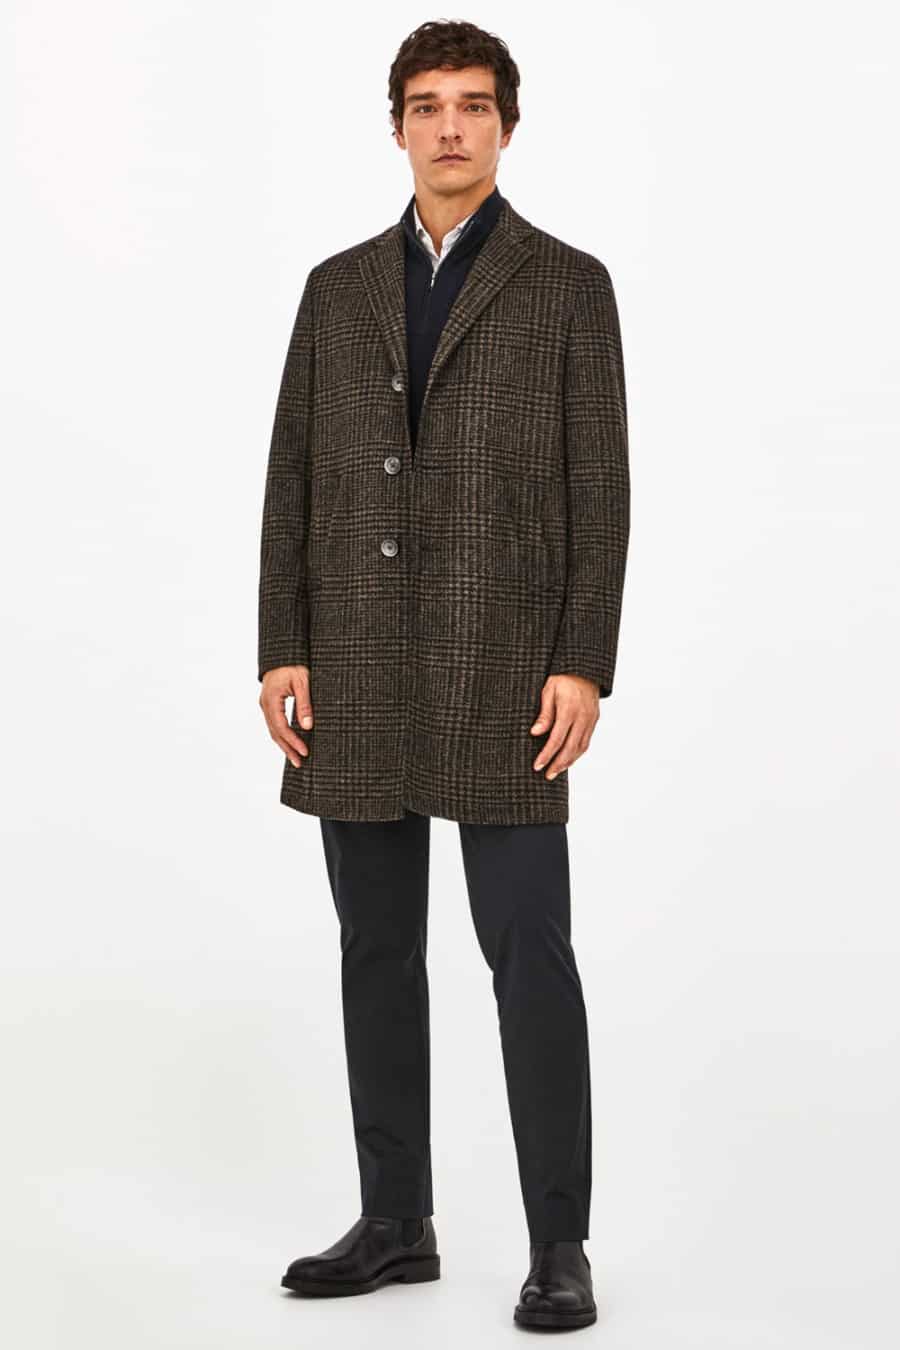 Men's black trousers, black Chelsea boots, white shirt, black zip neck sweater and brown checked overcoat outfit